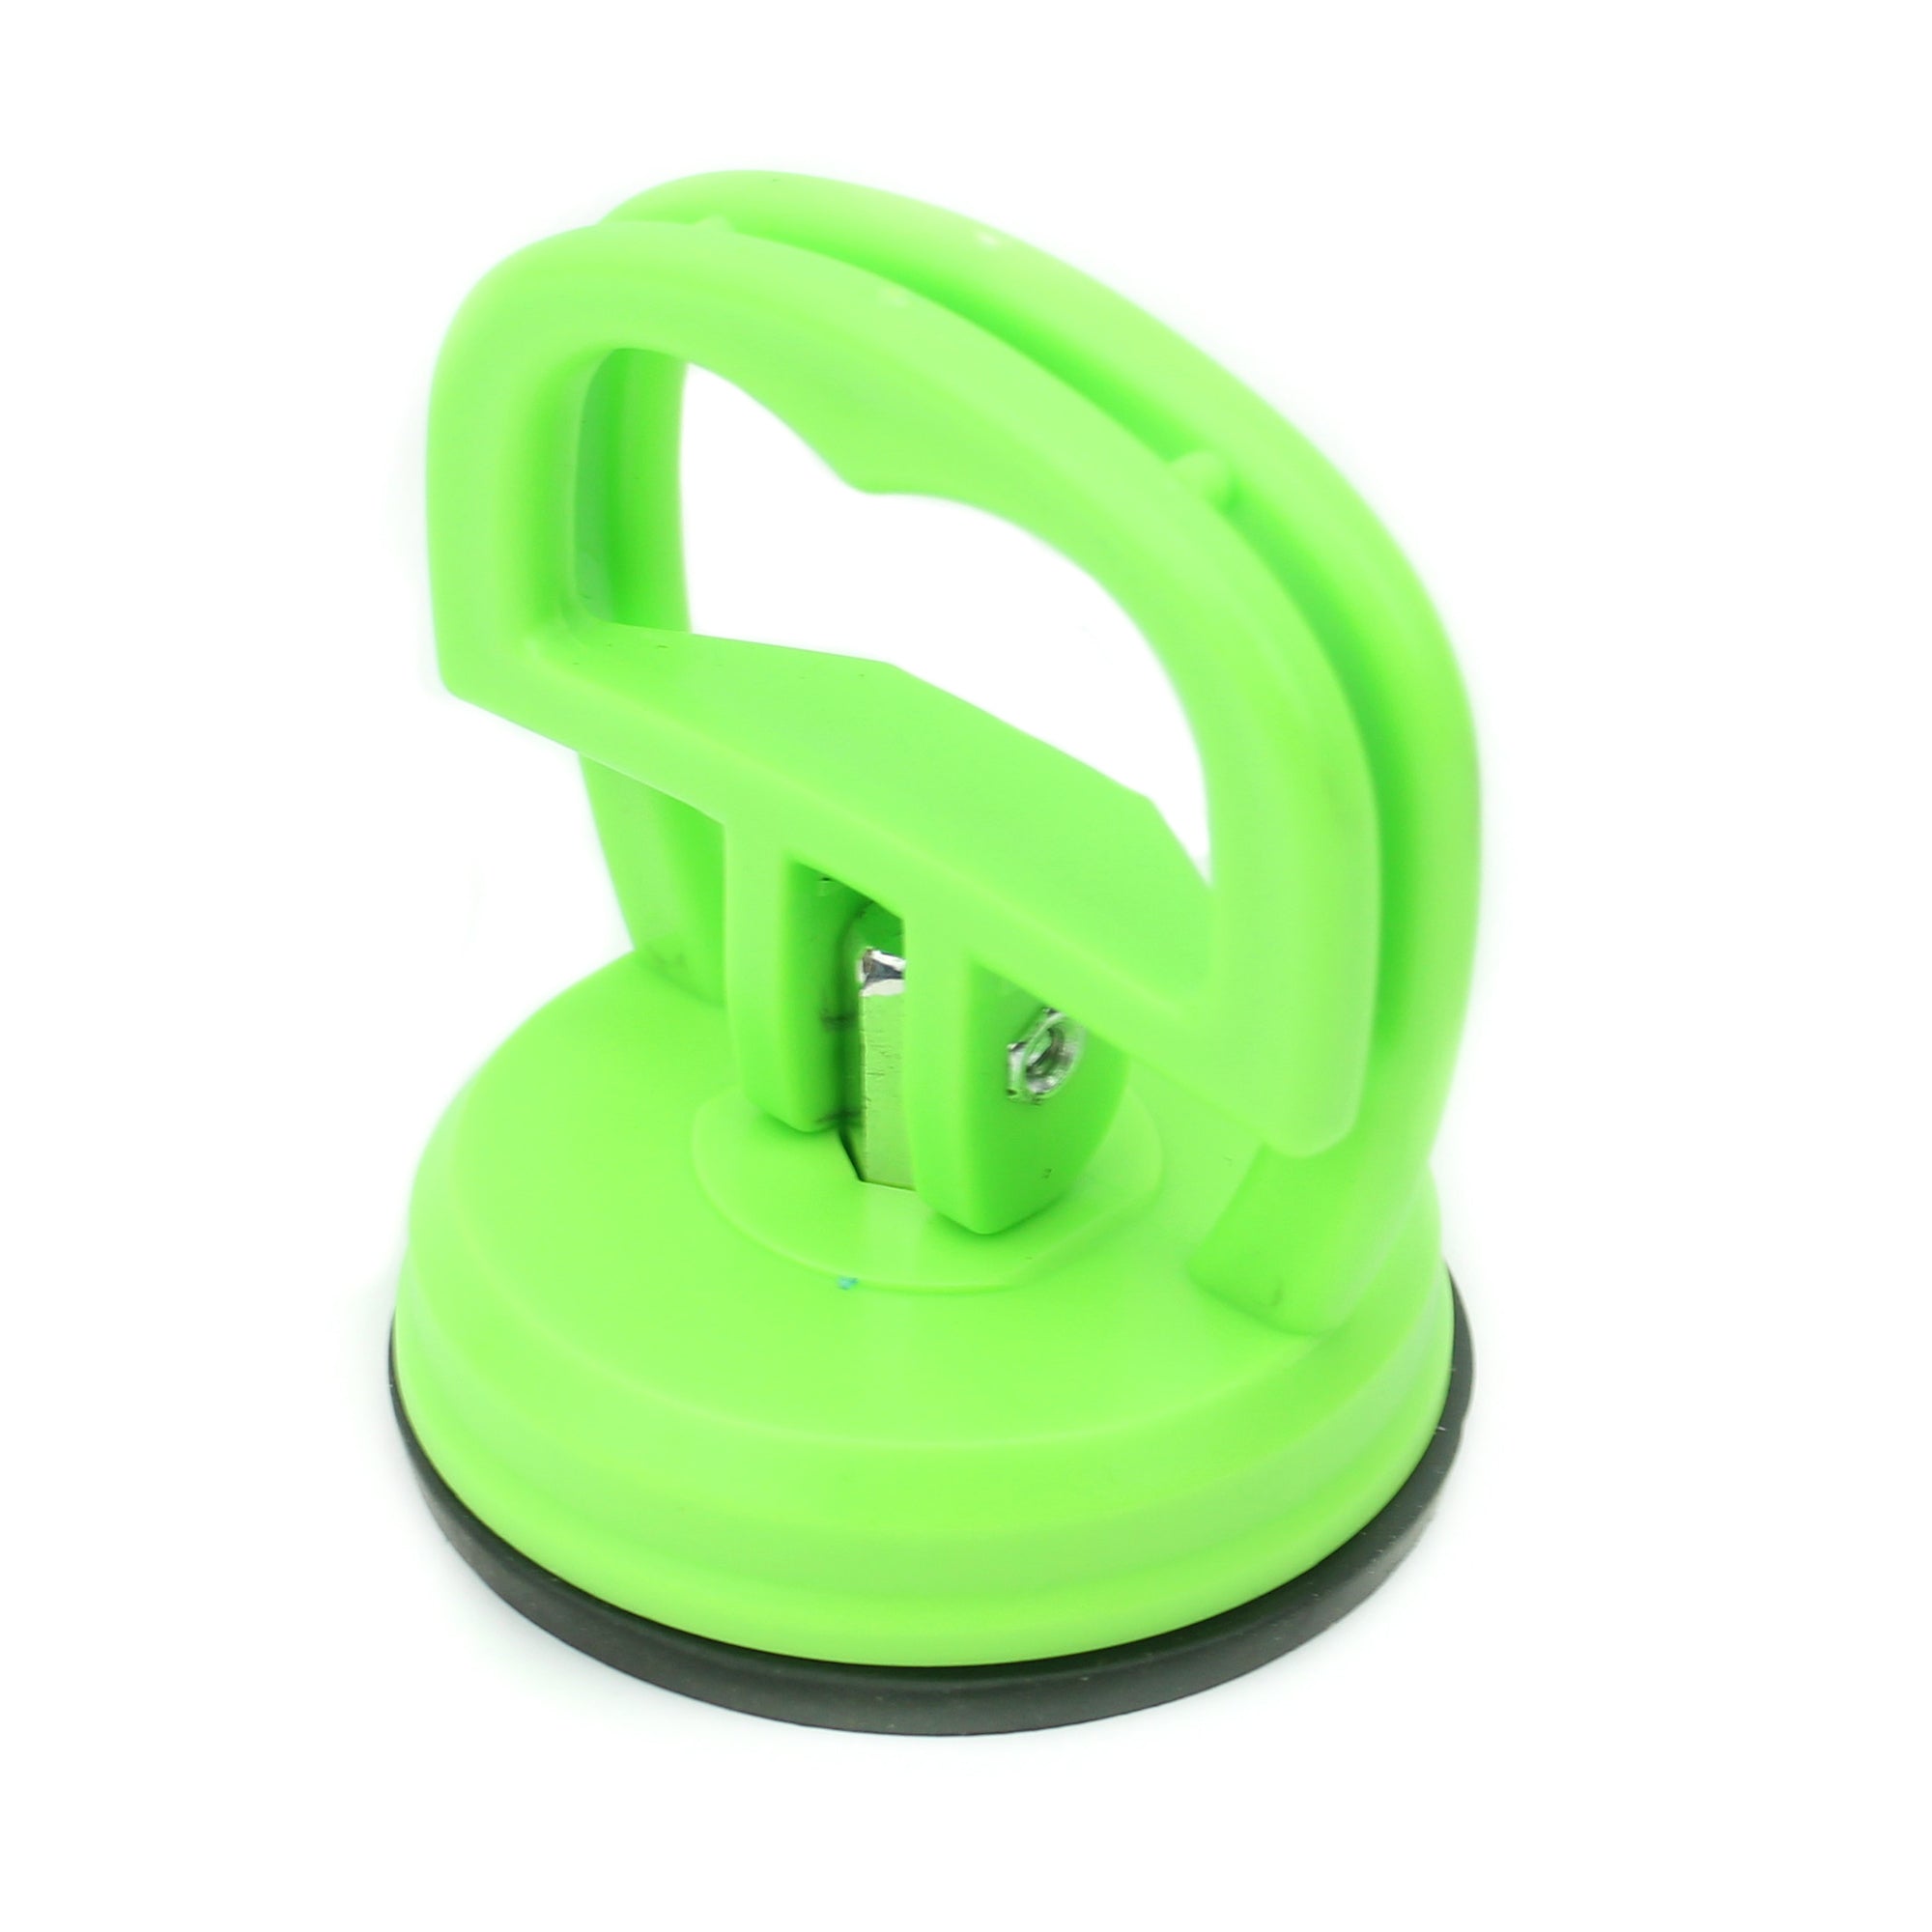 P8822 Powerful Suction Cup Dent Puller for Smartphone Glass Panel Repairing - Green